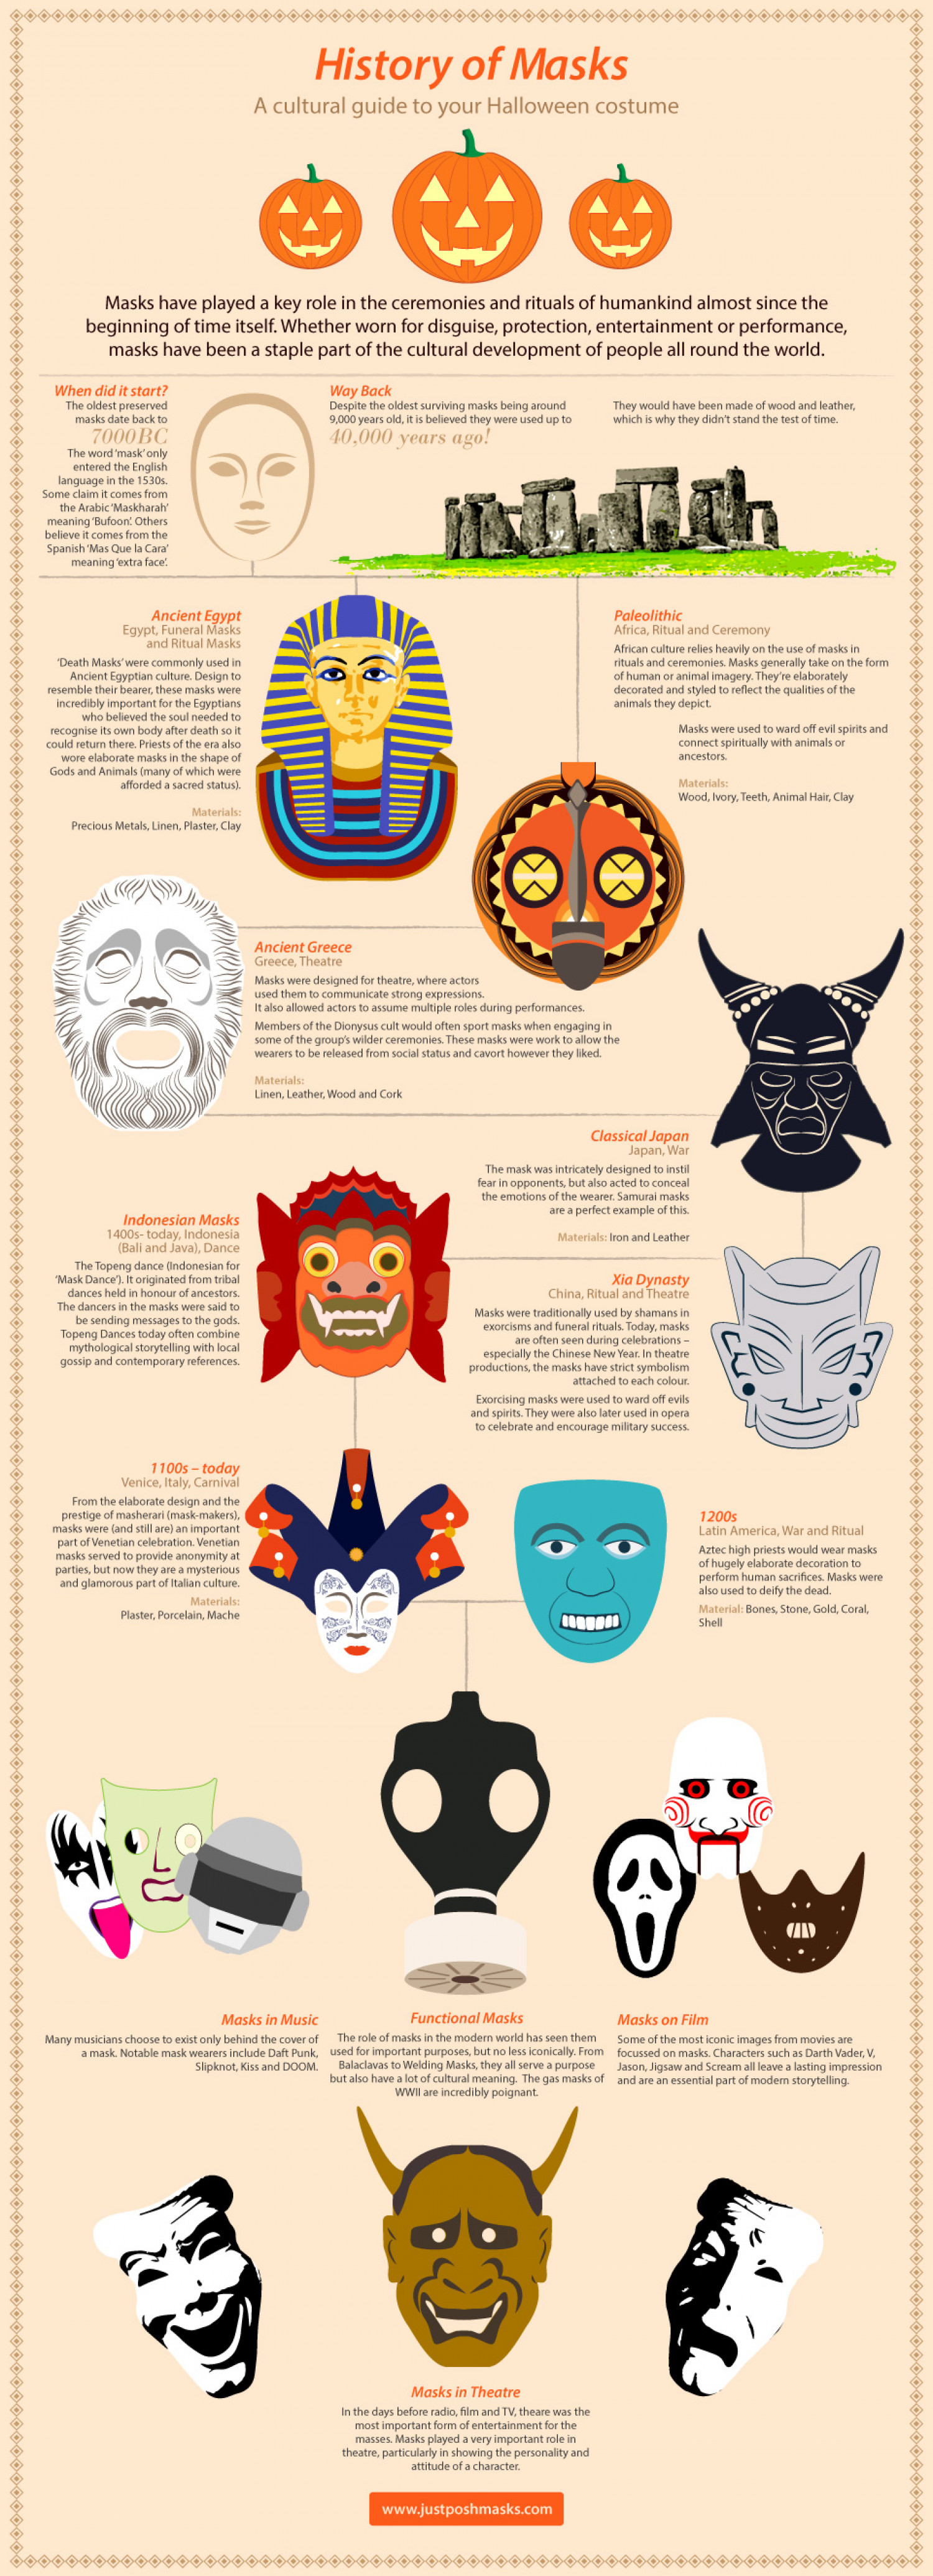 A History of Masks for Halloween Infographic